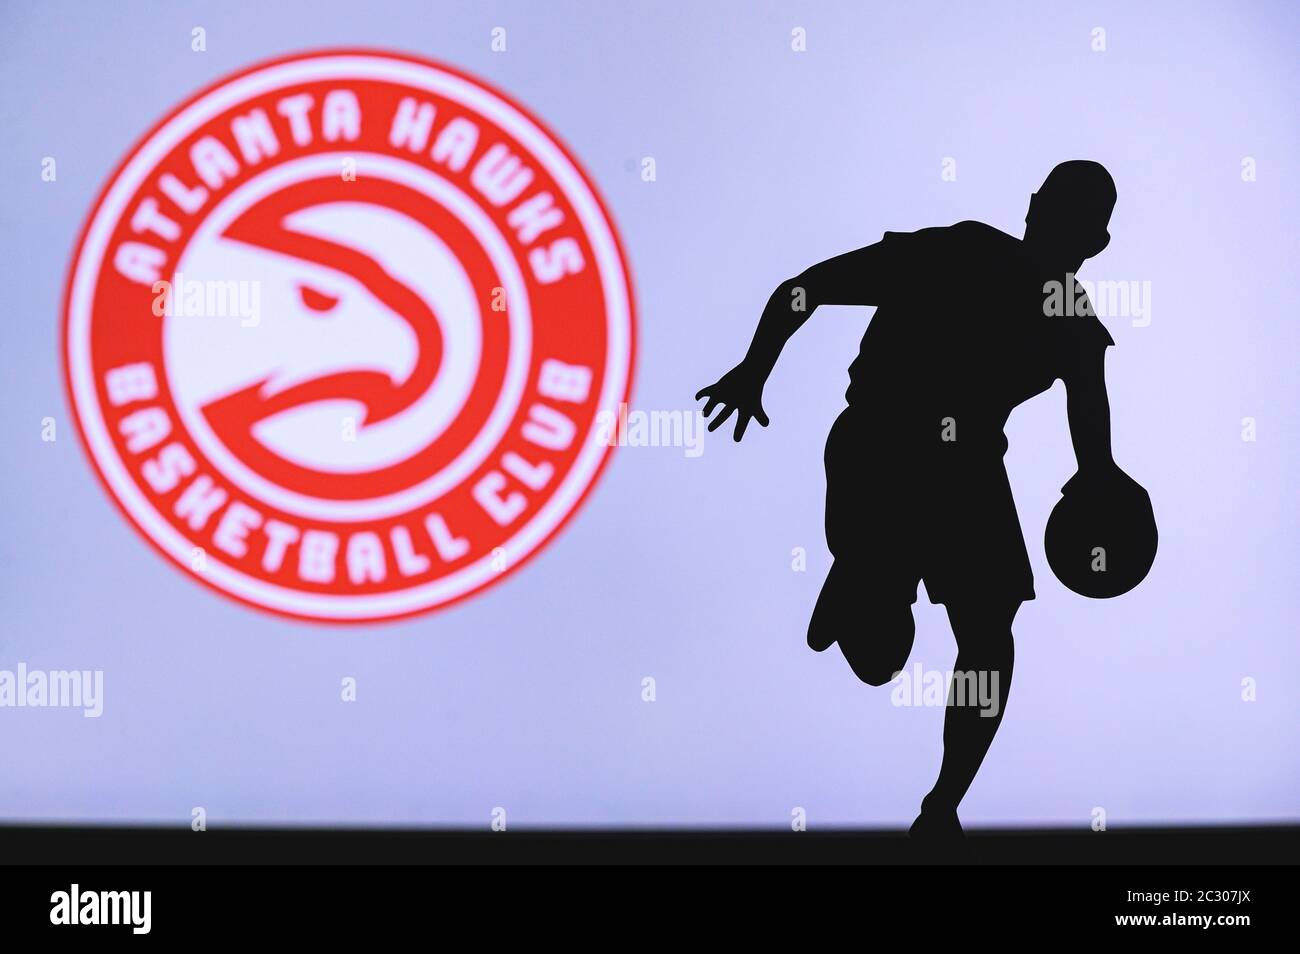 New York Usa Jun 18 2020 Atlanta Hawks Basketball Club Logo And Silhouette Of Young Basketball Player Sport Wallpaper White Edit Space In Backgr Stock Photo Alamy